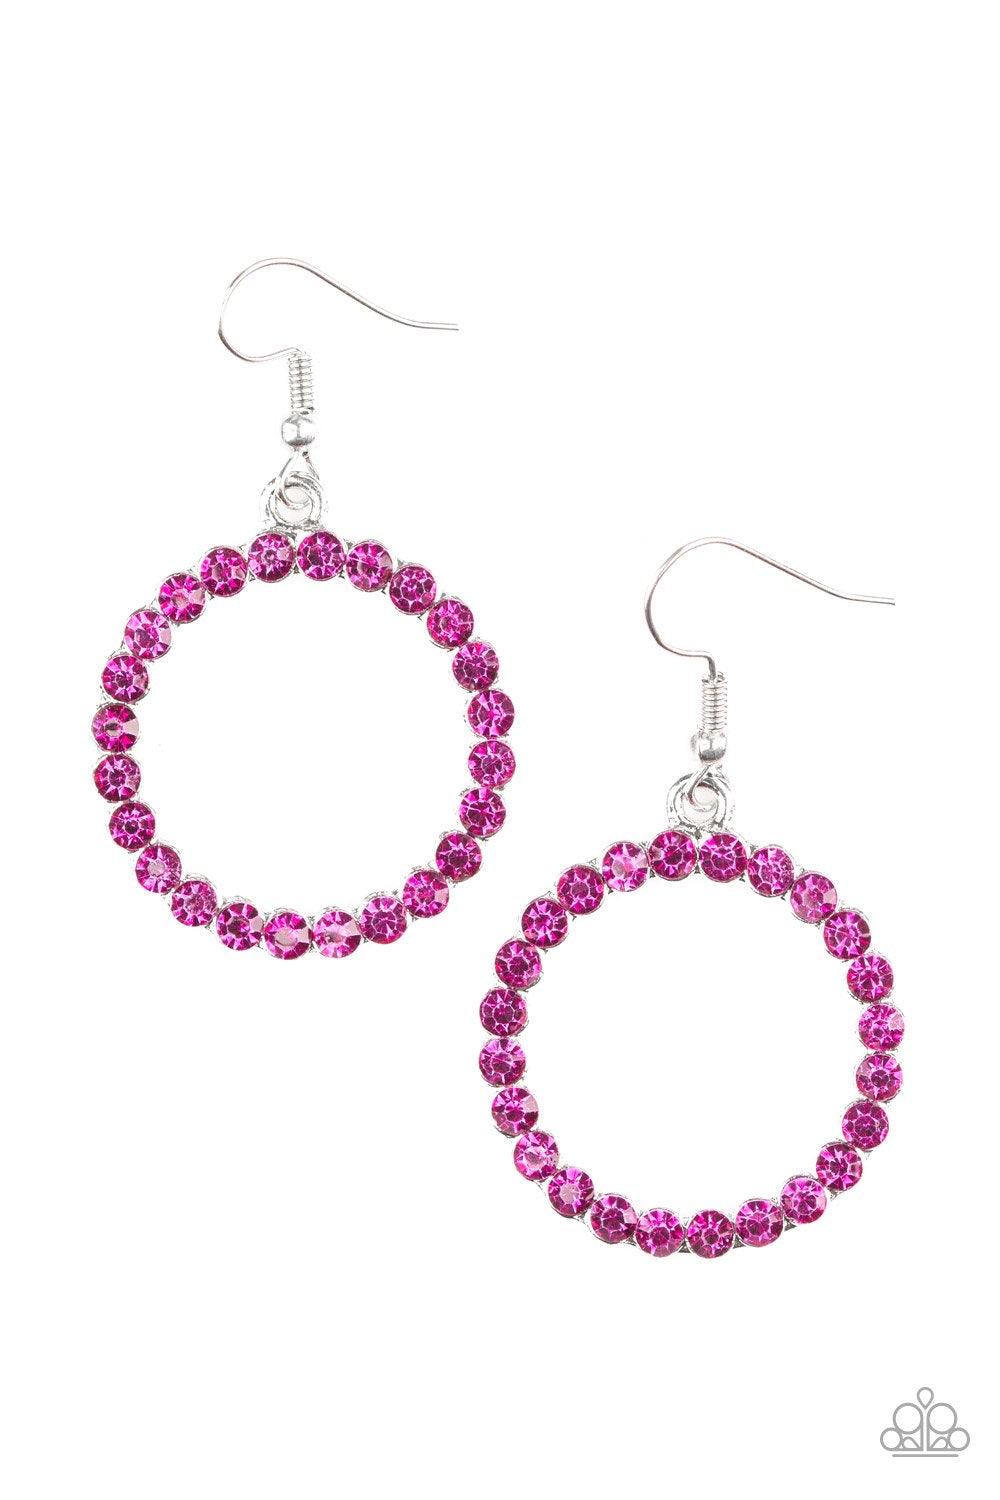 Paparazzi Accessories Bubbilicious - Pink Glittery pink rhinestones are encrusted along a circular silver frame, creating a bubbly frame. Earring attaches to a standard fishhook fitting. Sold as one pair of earrings. Jewelry